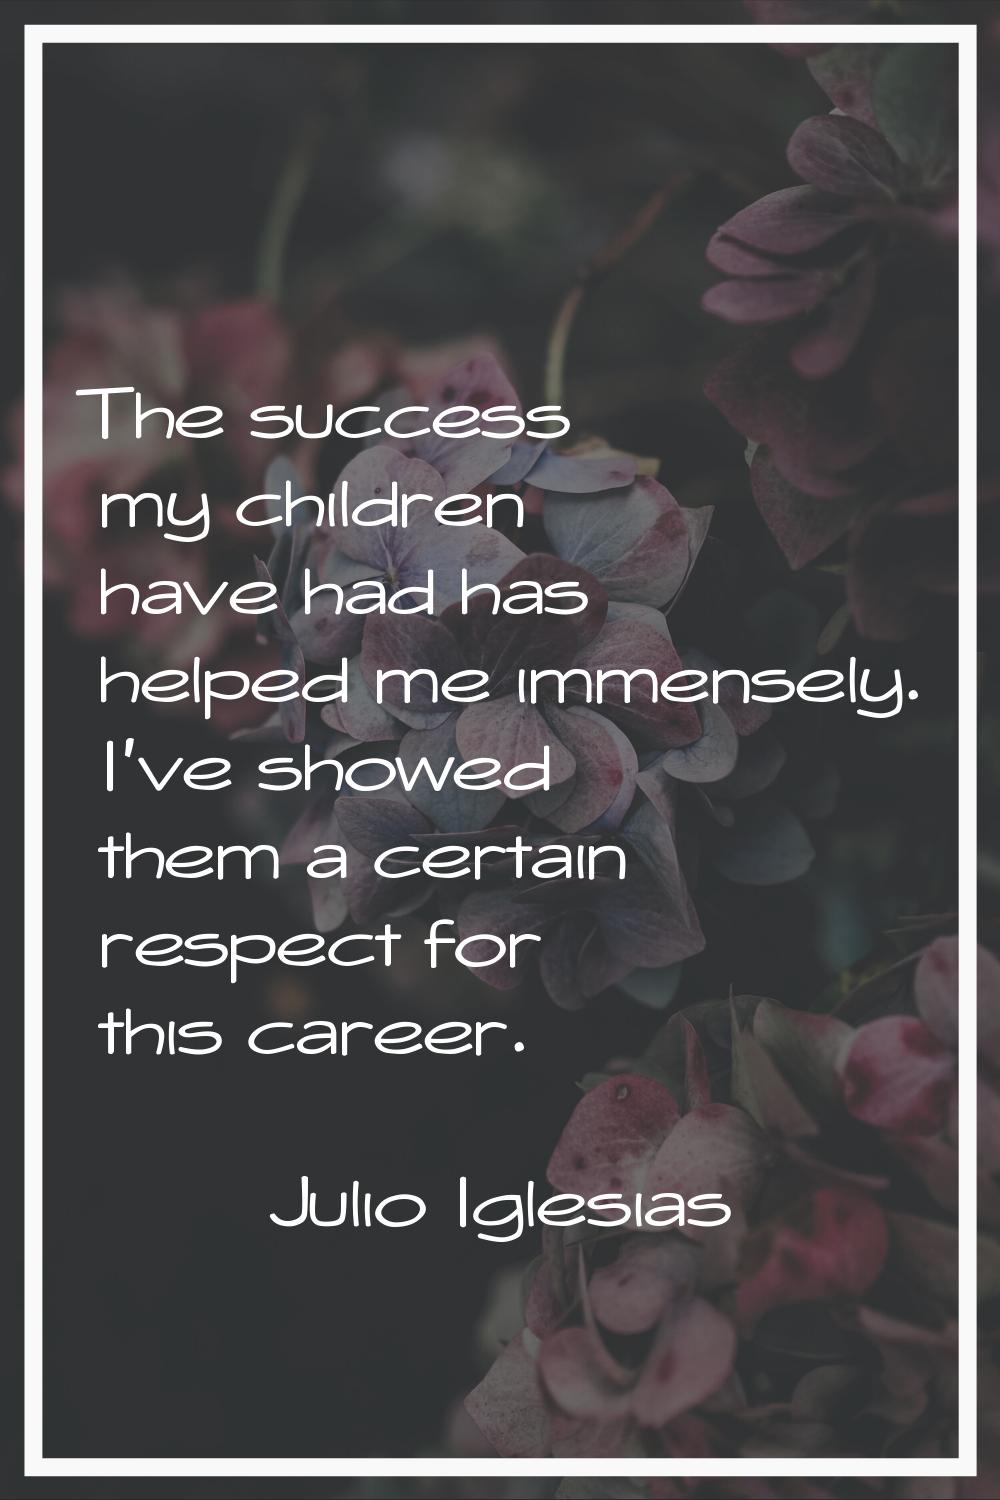 The success my children have had has helped me immensely. I've showed them a certain respect for th